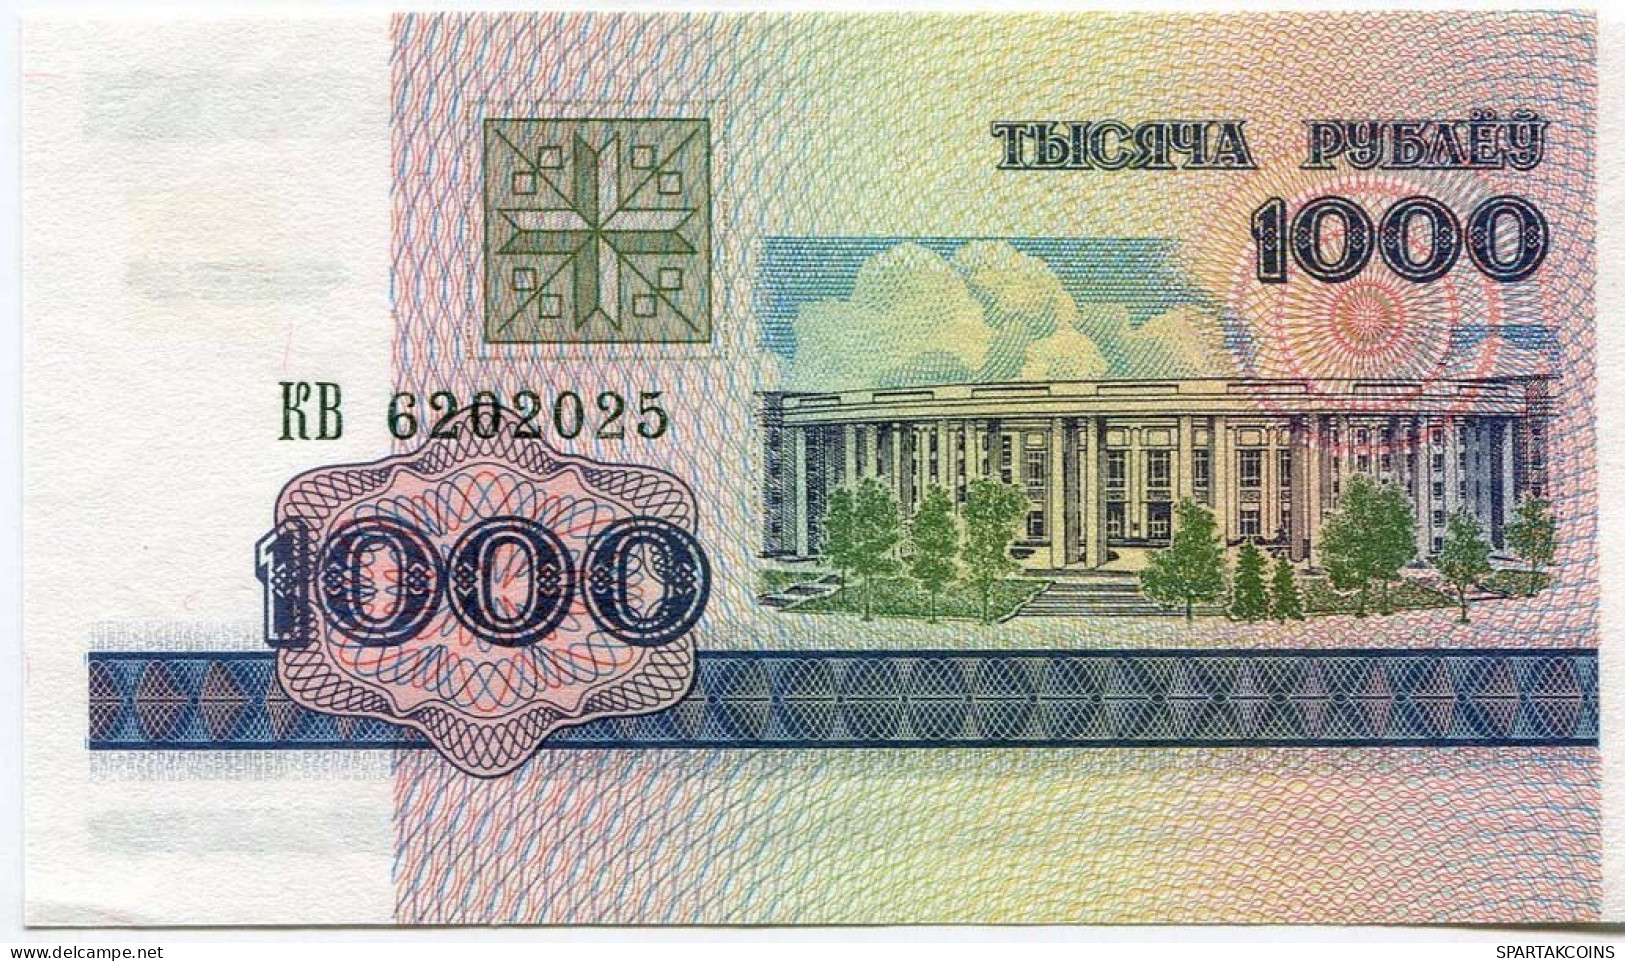 BELARUS 1000 RUBLES 1998 Paper Money Banknote #P10197.V - [11] Local Banknote Issues